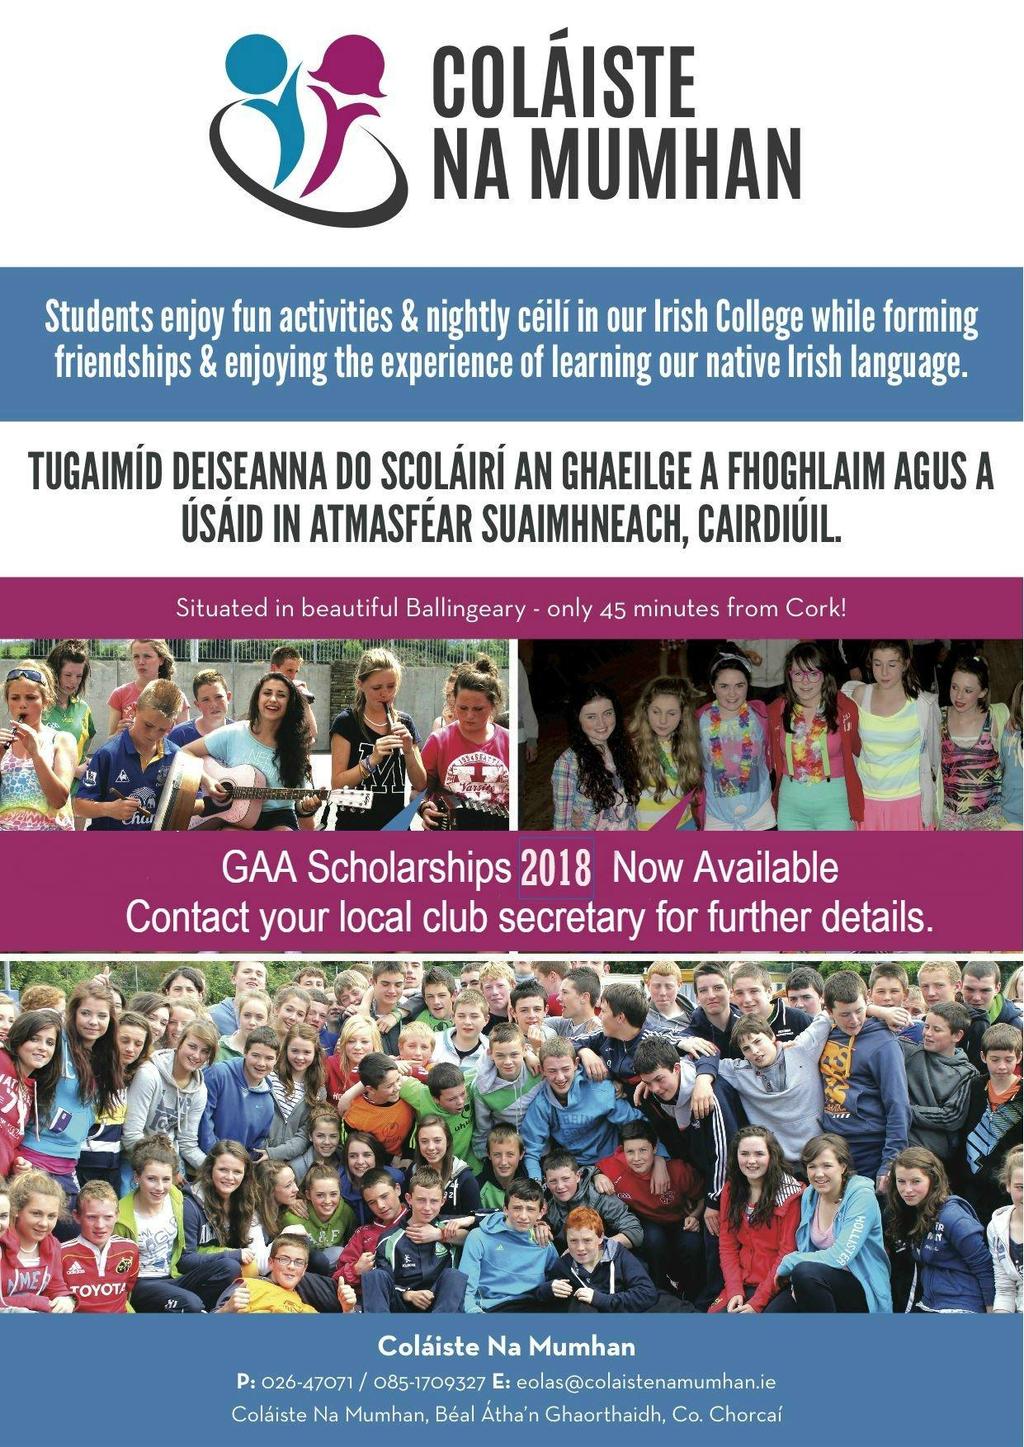 There are a small number of 2018 Gaeltacht Scholarship places still available on a first come, first